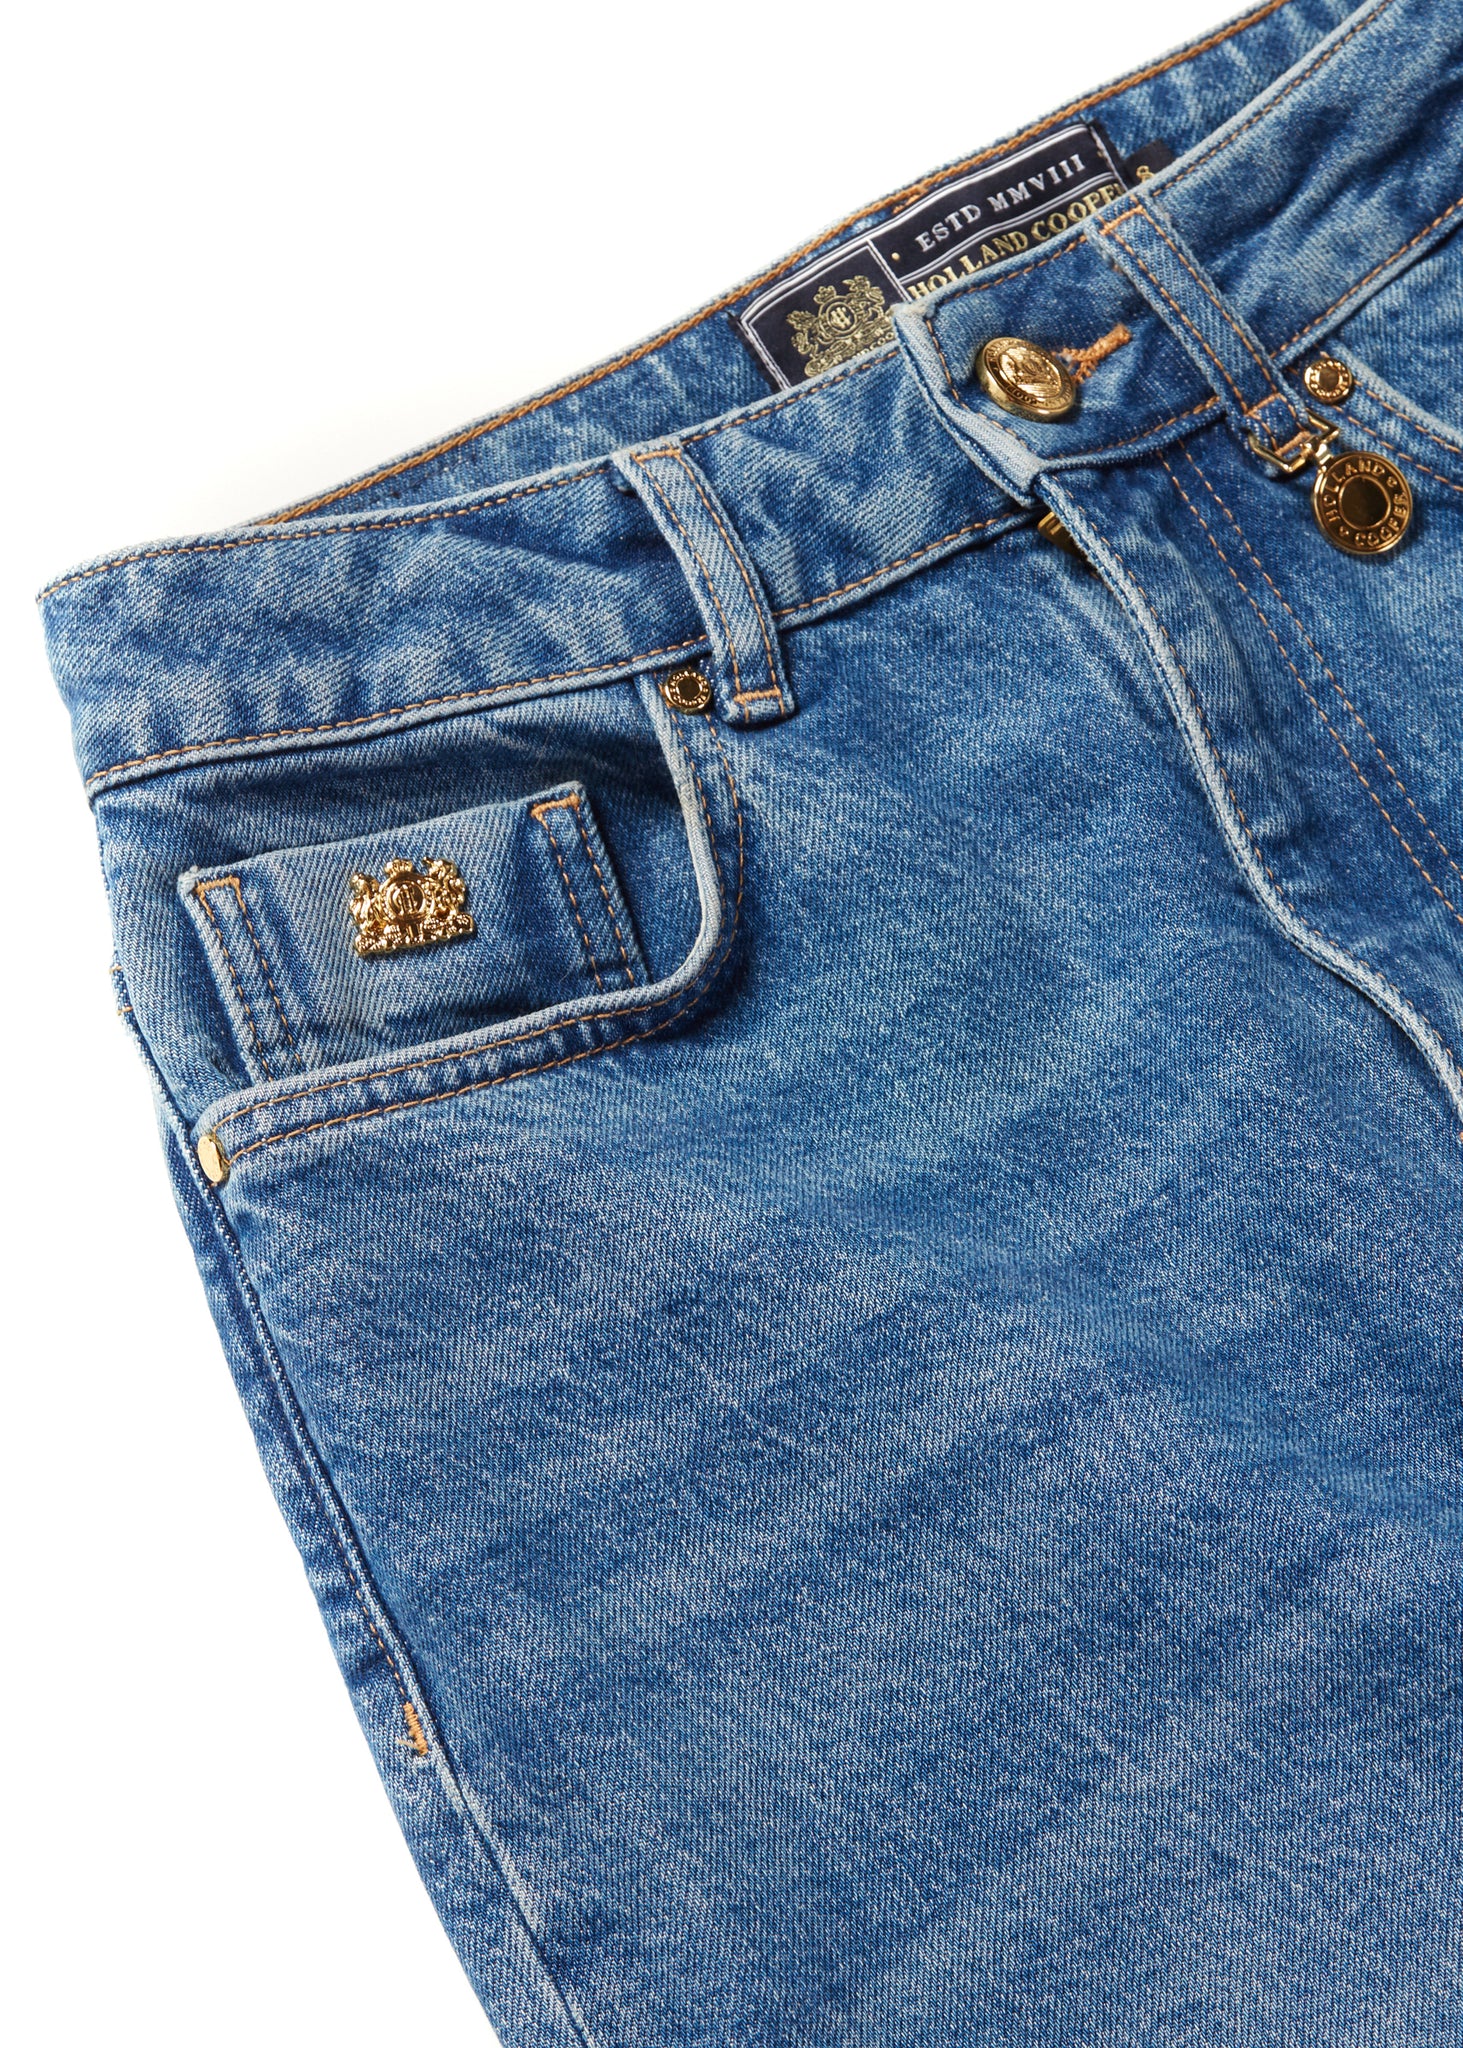 front pocket detail on womens high rise blue denim slim fit jean with raw hem and two open pockets on the front and back with gold stirrup charm to the belt loop